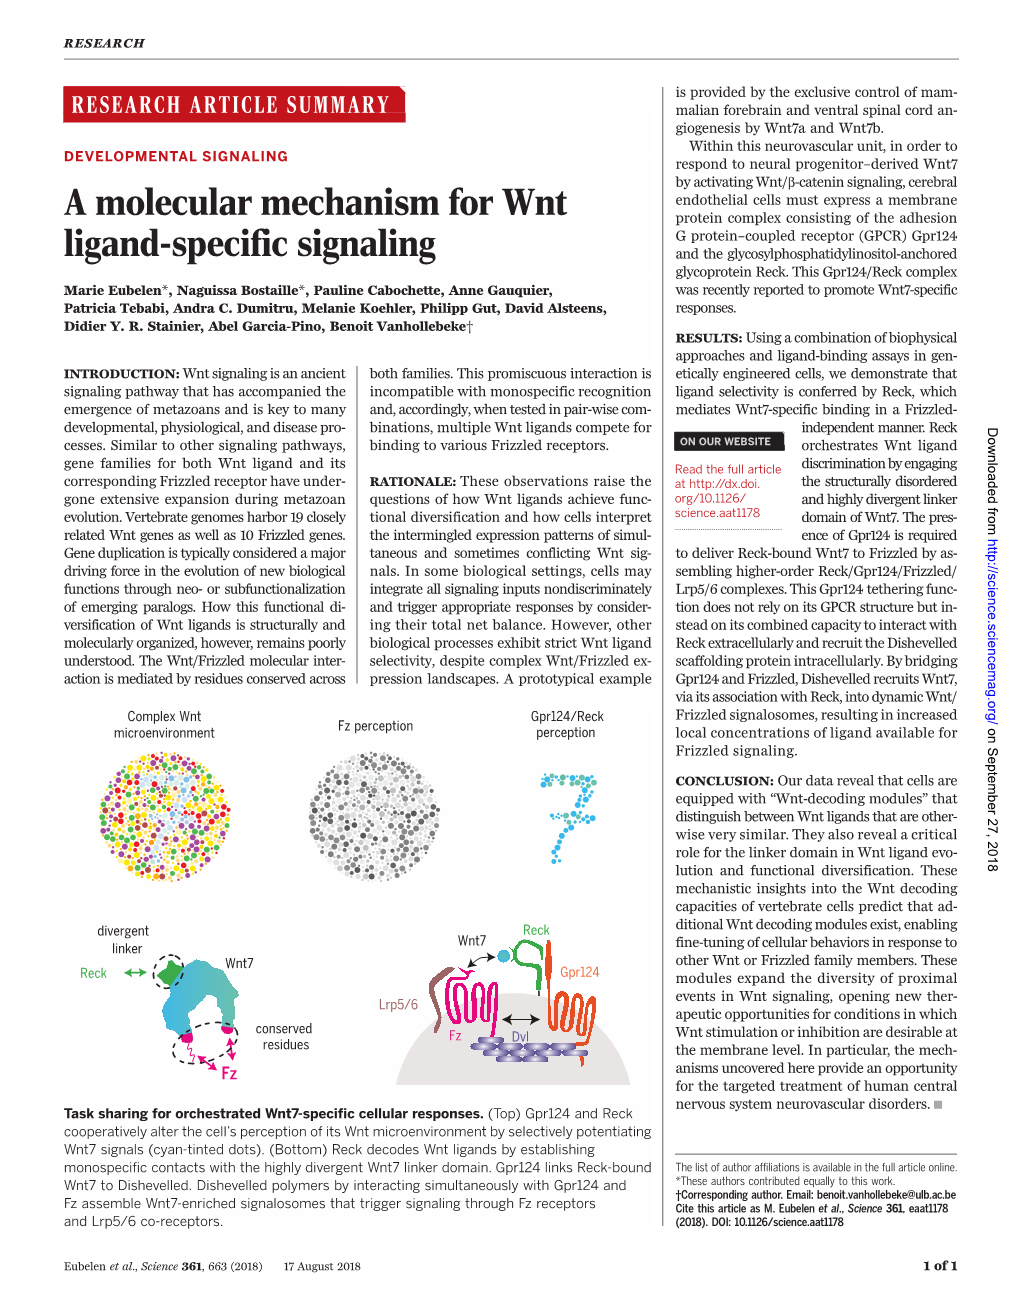 A Molecular Mechanism for Wnt Ligand-Specific Signaling Marie Eubelen, Naguissa Bostaille, Pauline Cabochette, Anne Gauquier, Patricia Tebabi, Andra C